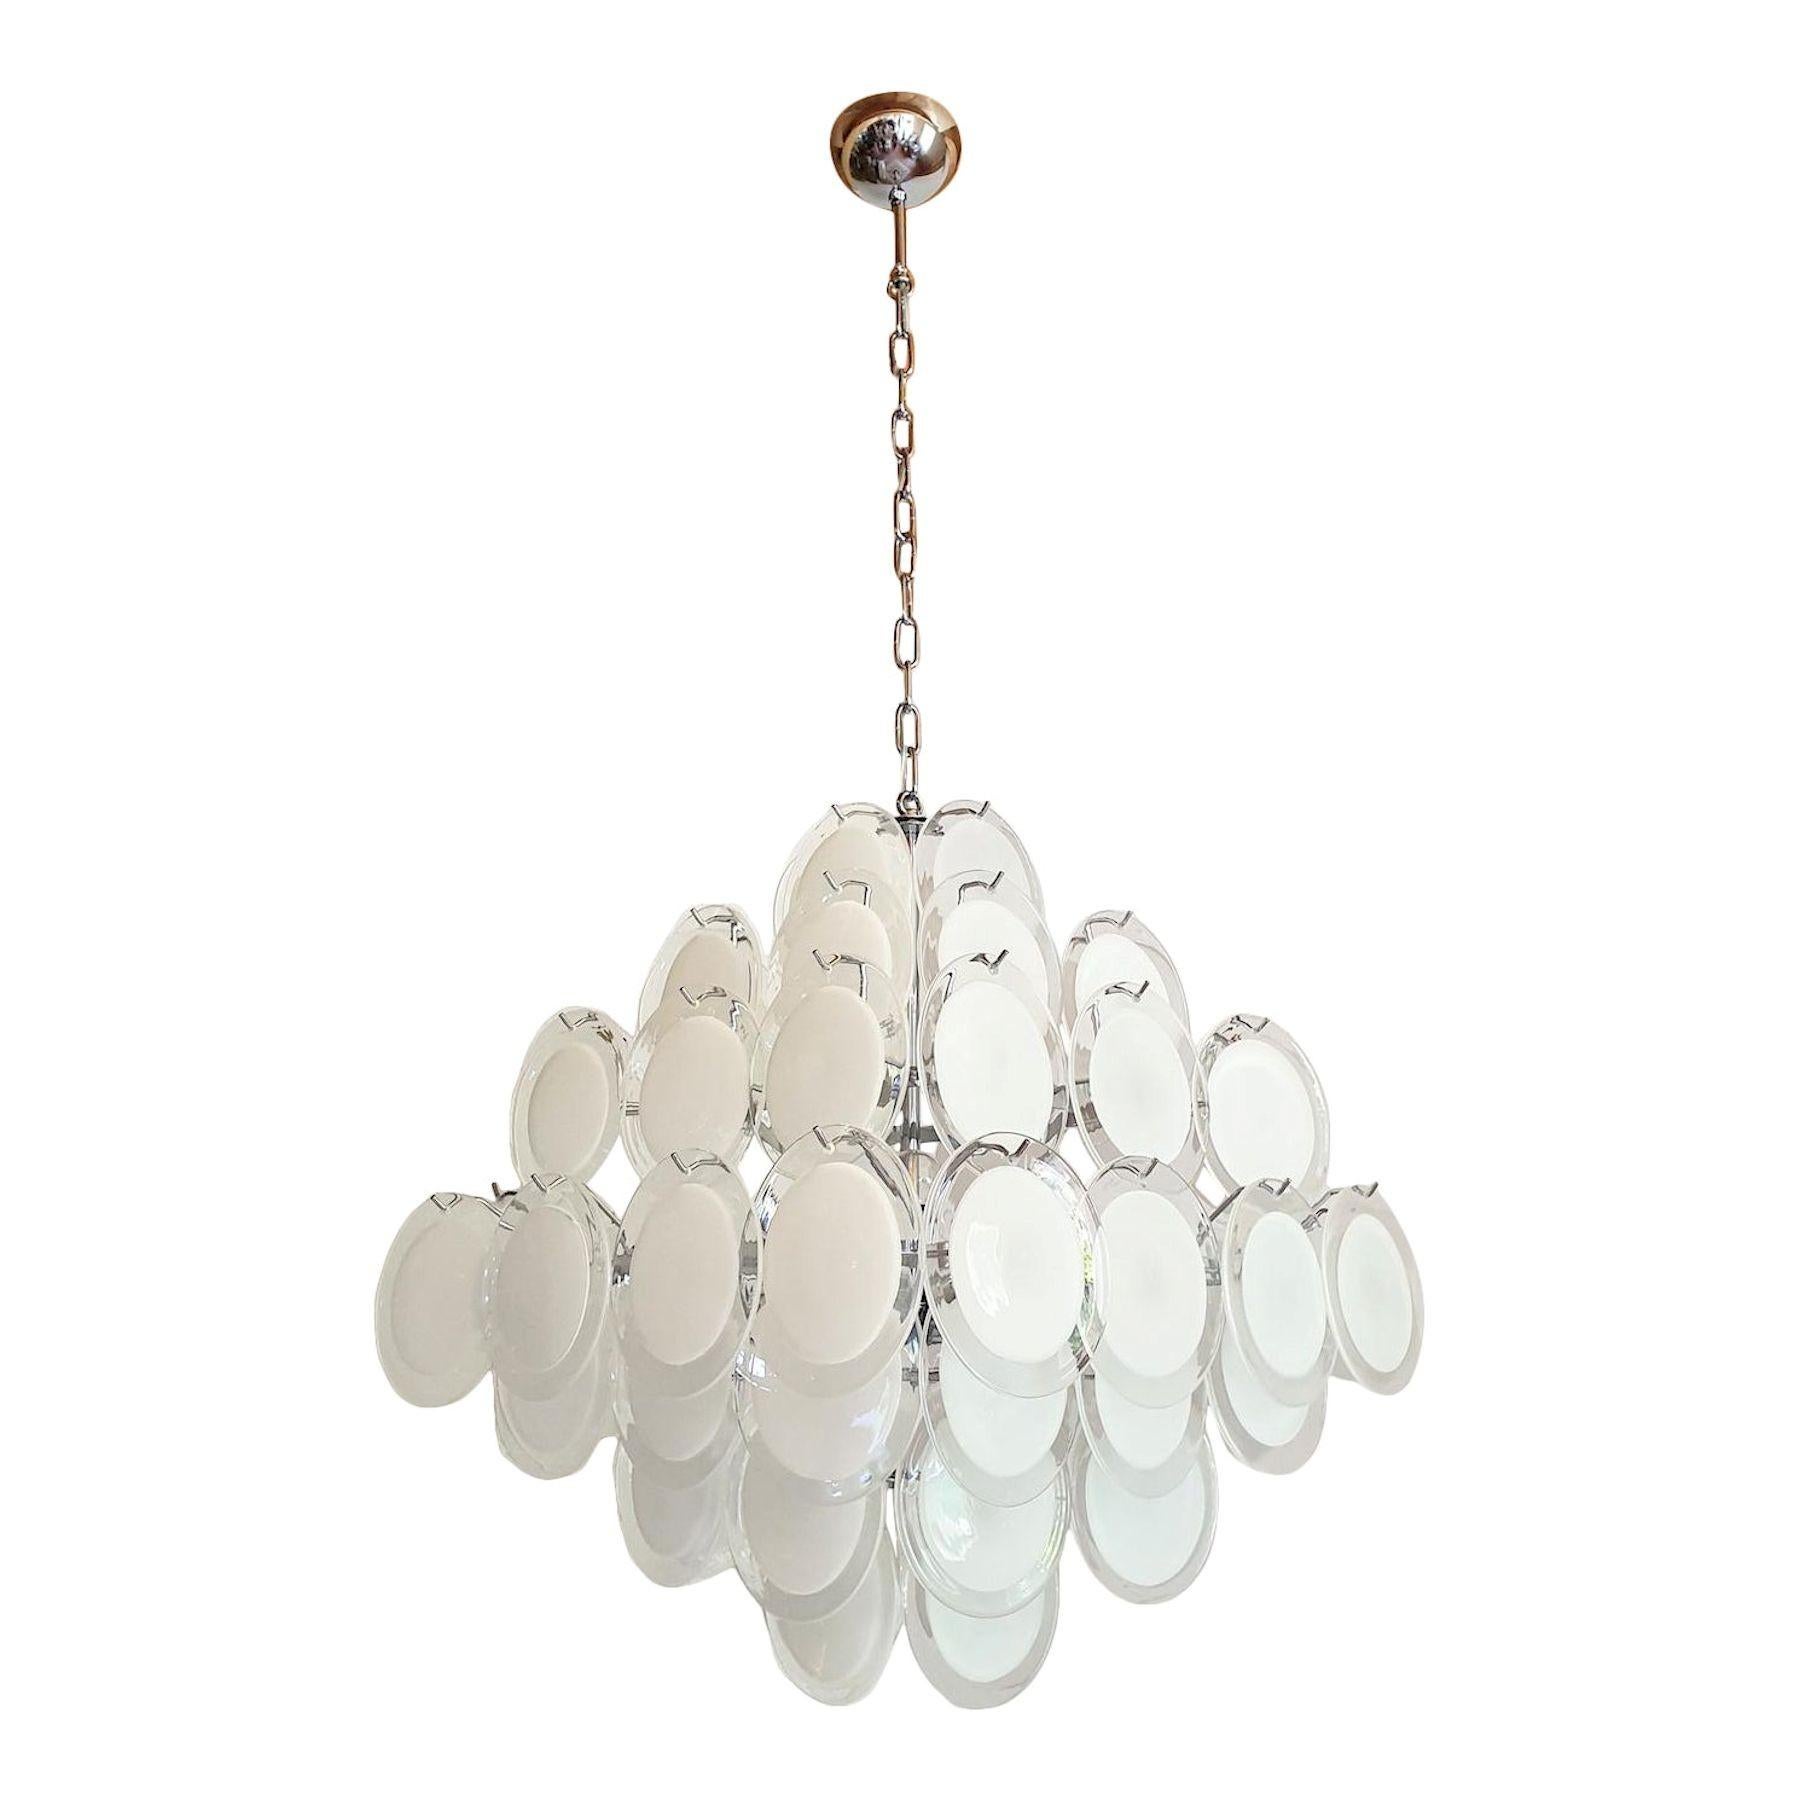 A large modernist pyramidal geometric discs chandelier, by Vistosi Italy 1980s.
The Mid Century Modern chandelier is made of a chrome frame, and white Murano handmade glass discs.
Each handmade Murano disc is white and translucent at the center, and